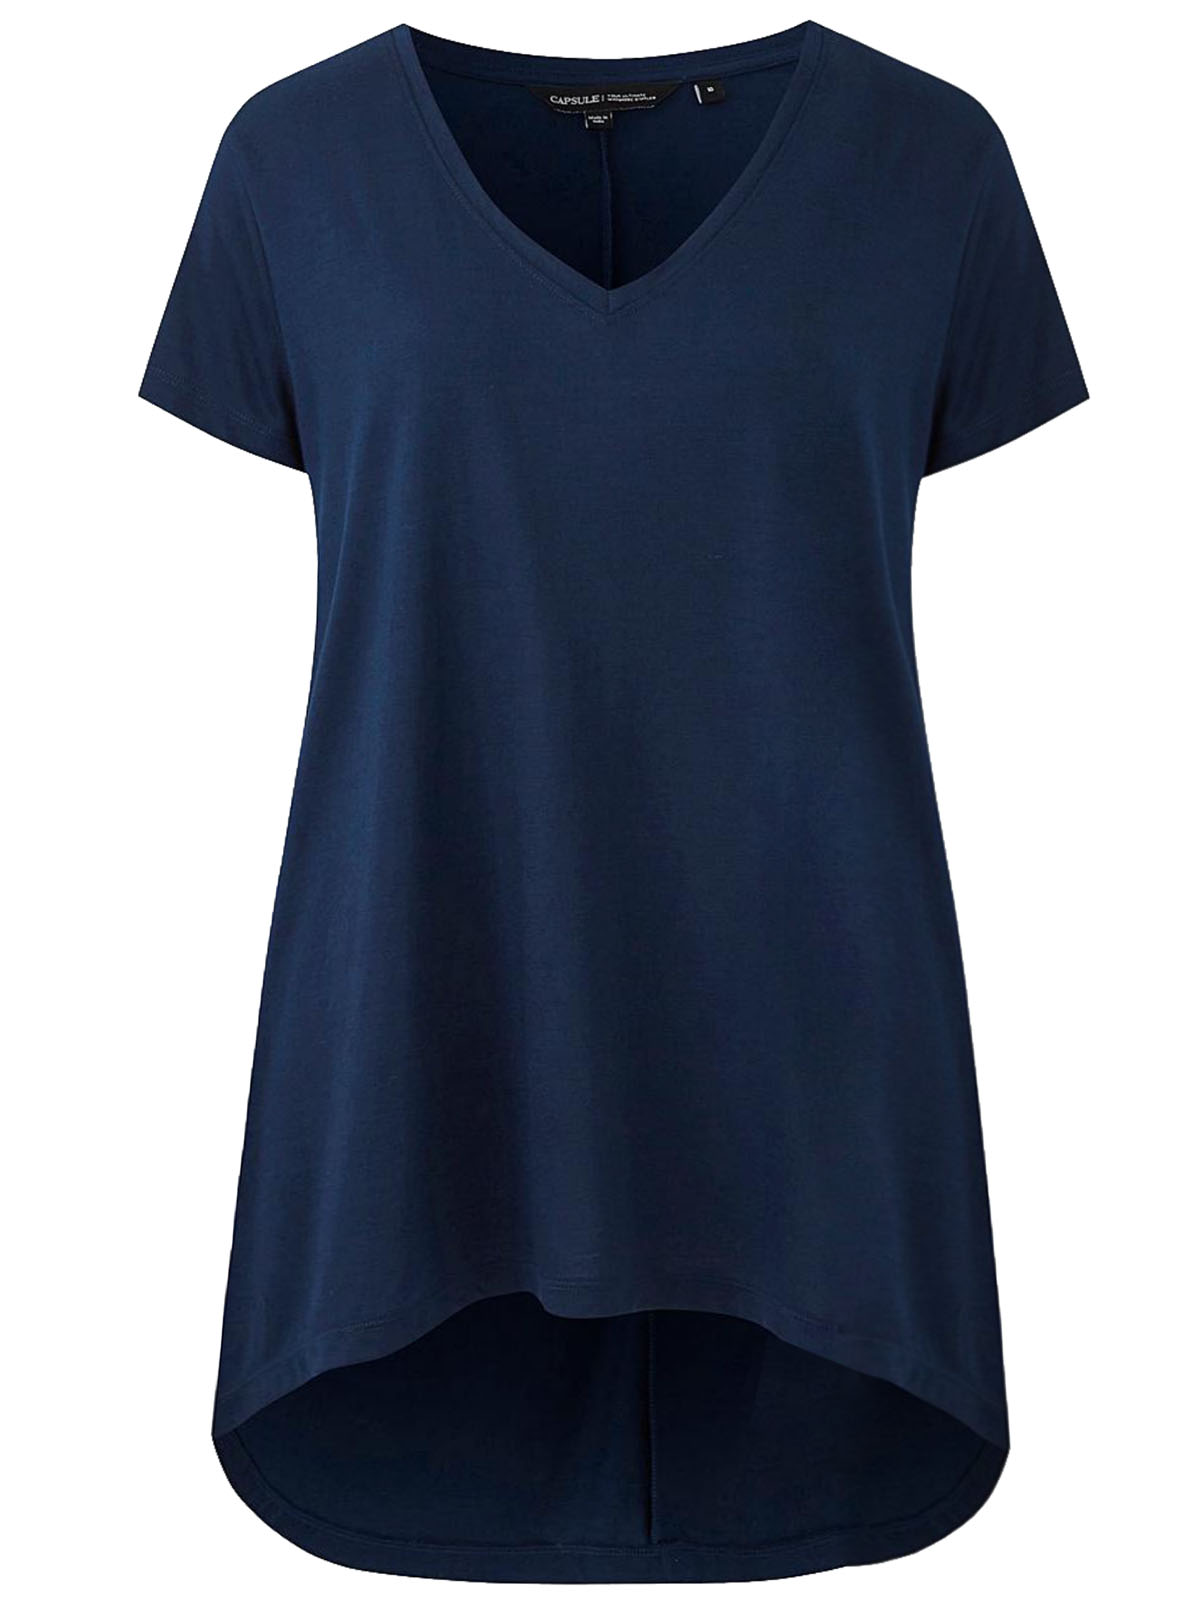 Capsule - - NAVY Dipped Hem Jersey Tunic - Plus Size 20 to 28